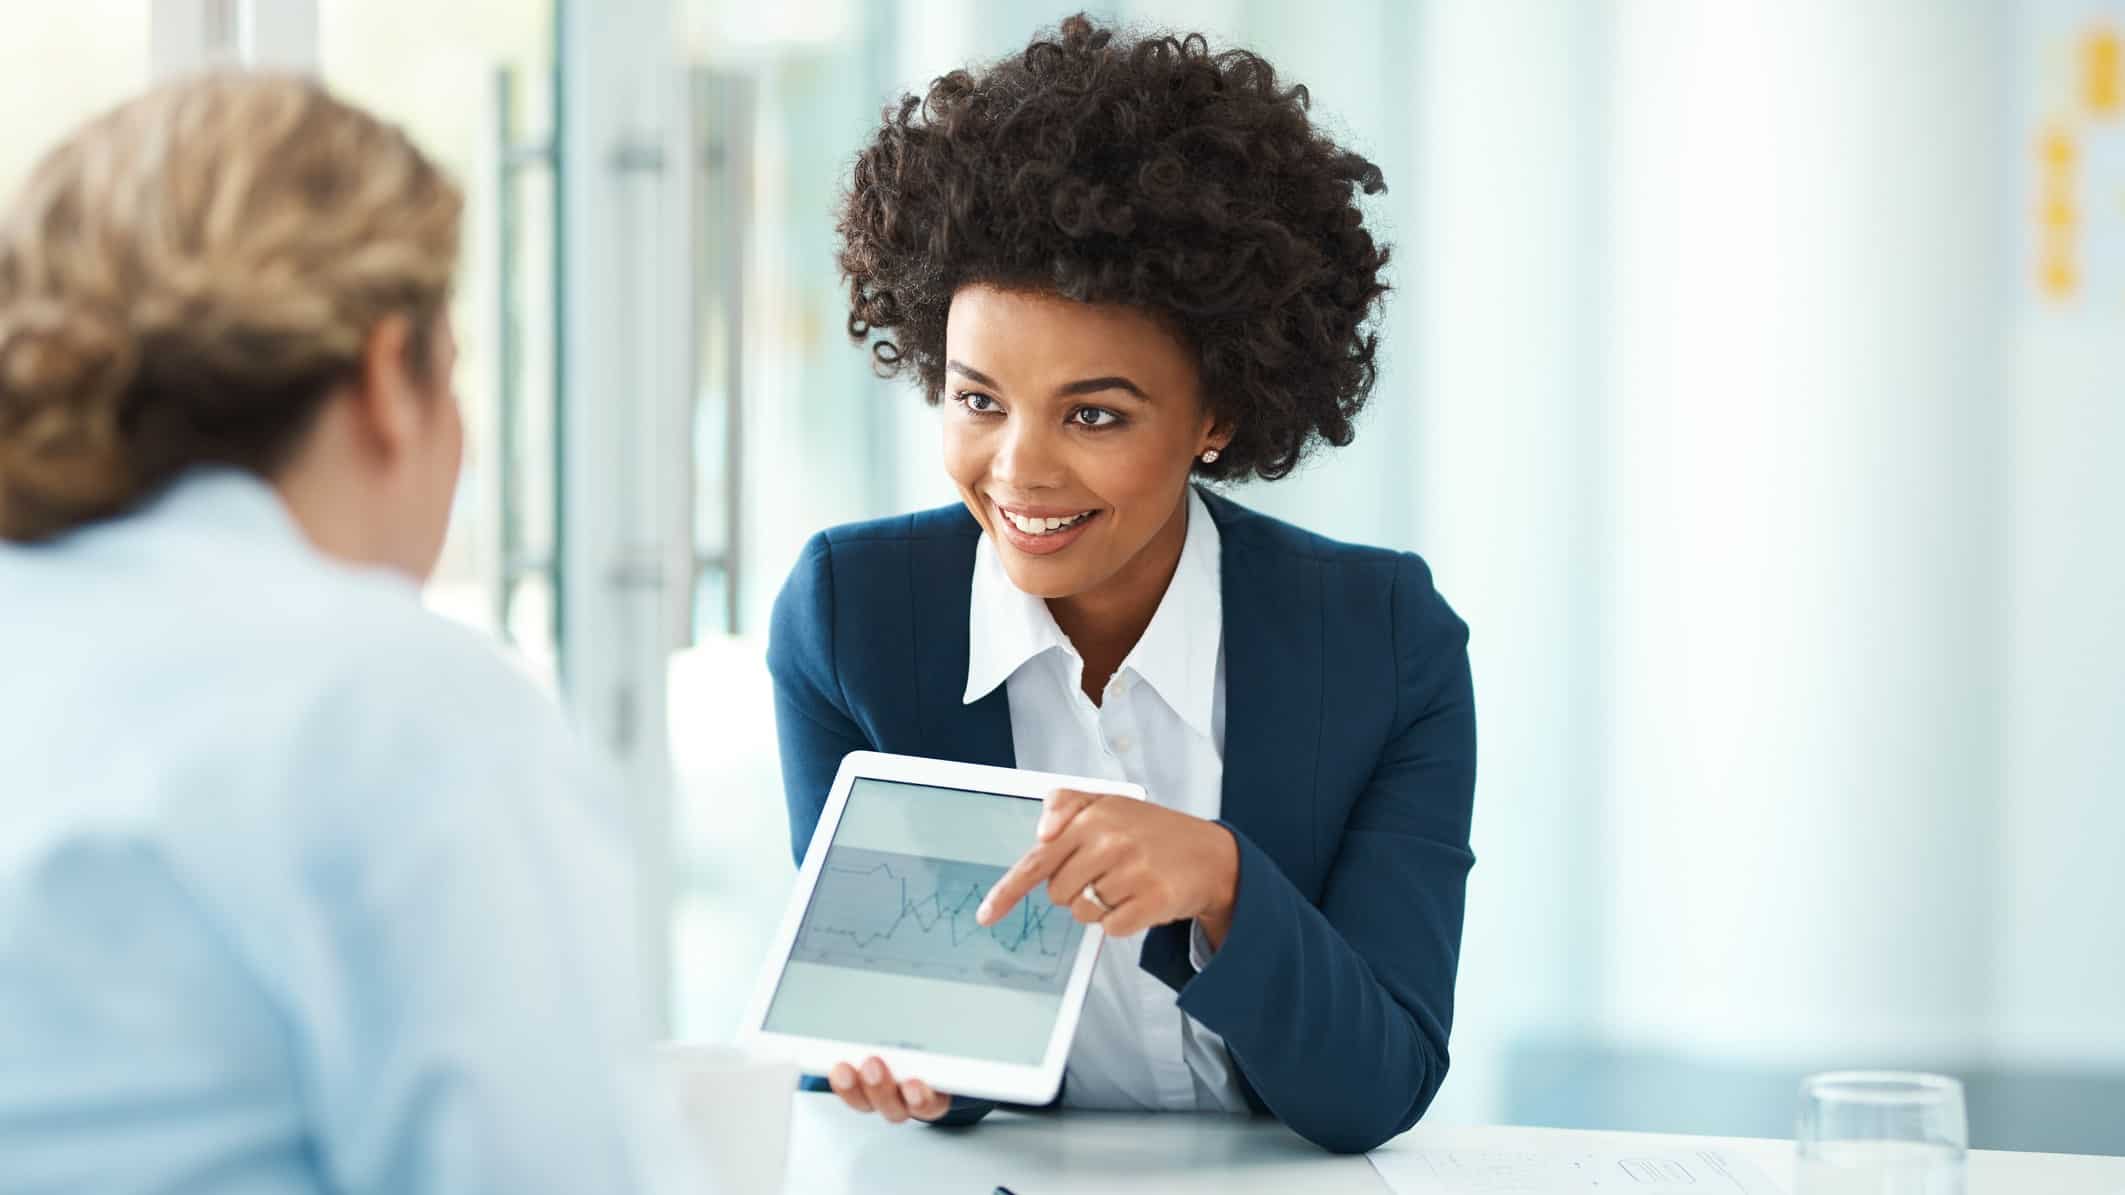 A female financial services professional with a manicured black afro hairstyle turns an ipad screen to show a client across the table a set of ASX shares figures in graph format